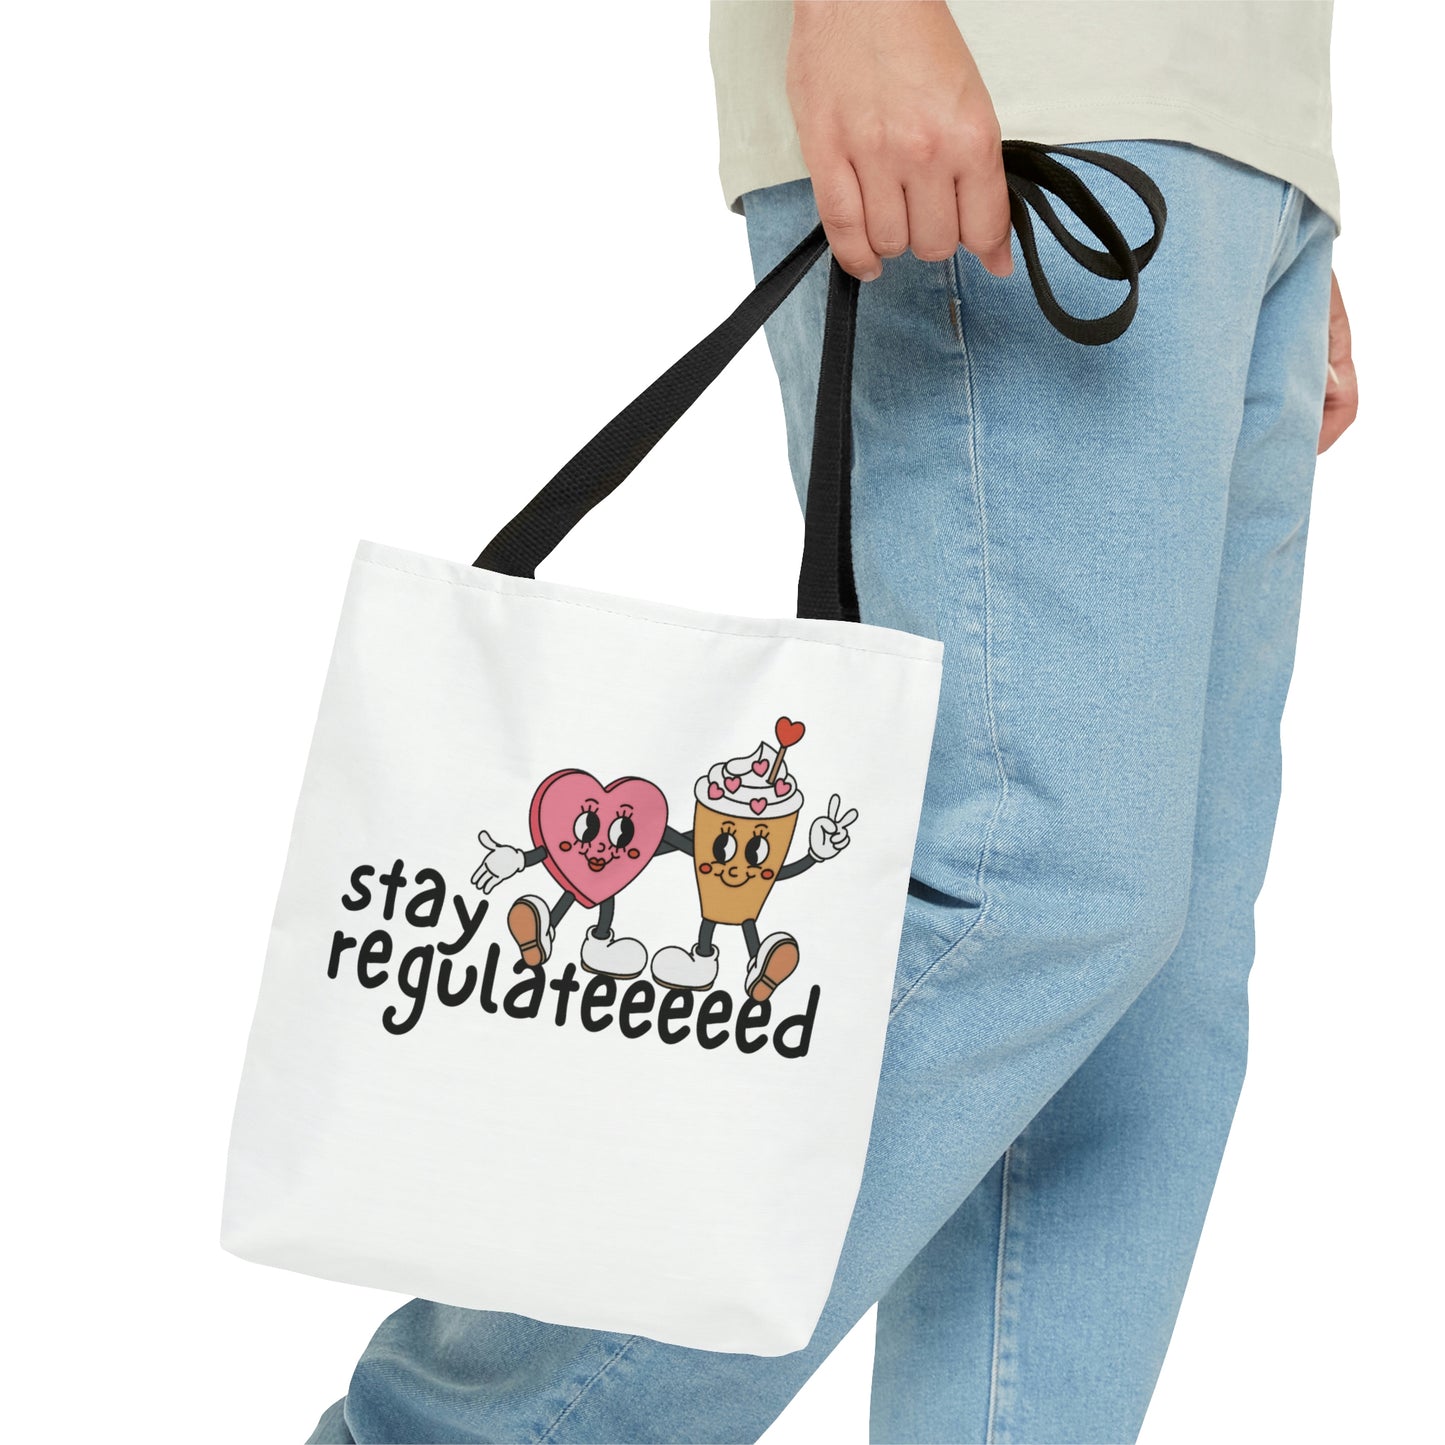 Stay Regulated Tote Bag in 3 sizes